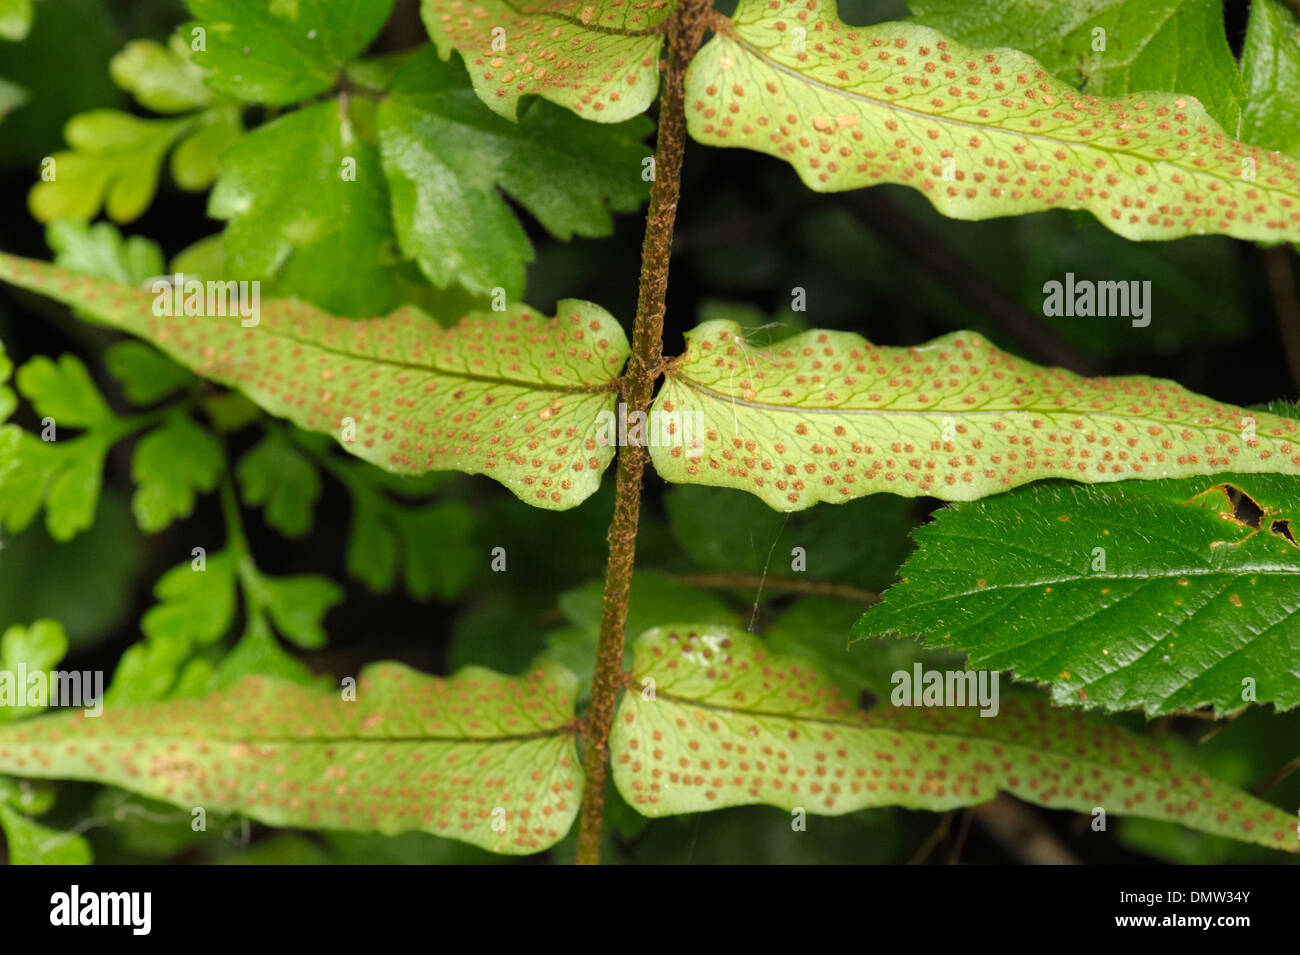 Fortune's cyrtomium or Japanese holly fern, Cyrtomium fortunei, growing in the wild, underside of leaves Stock Photo